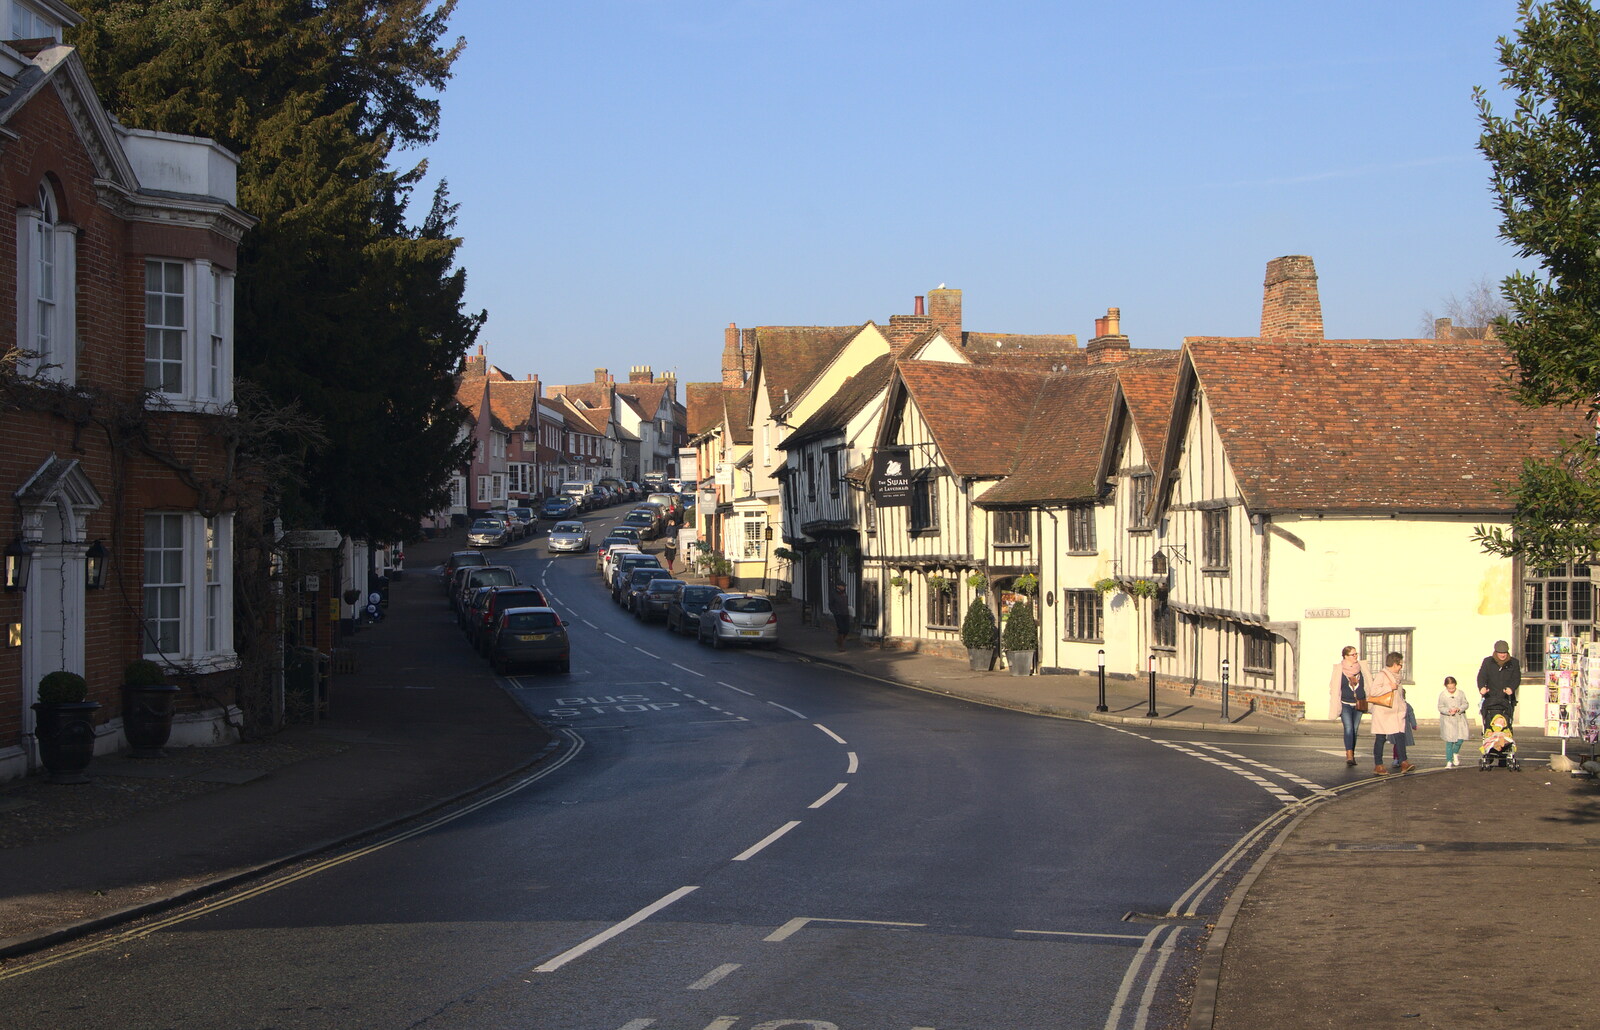 Lavenham High Street from A Day in Lavenham, Suffolk - 22nd January 2017